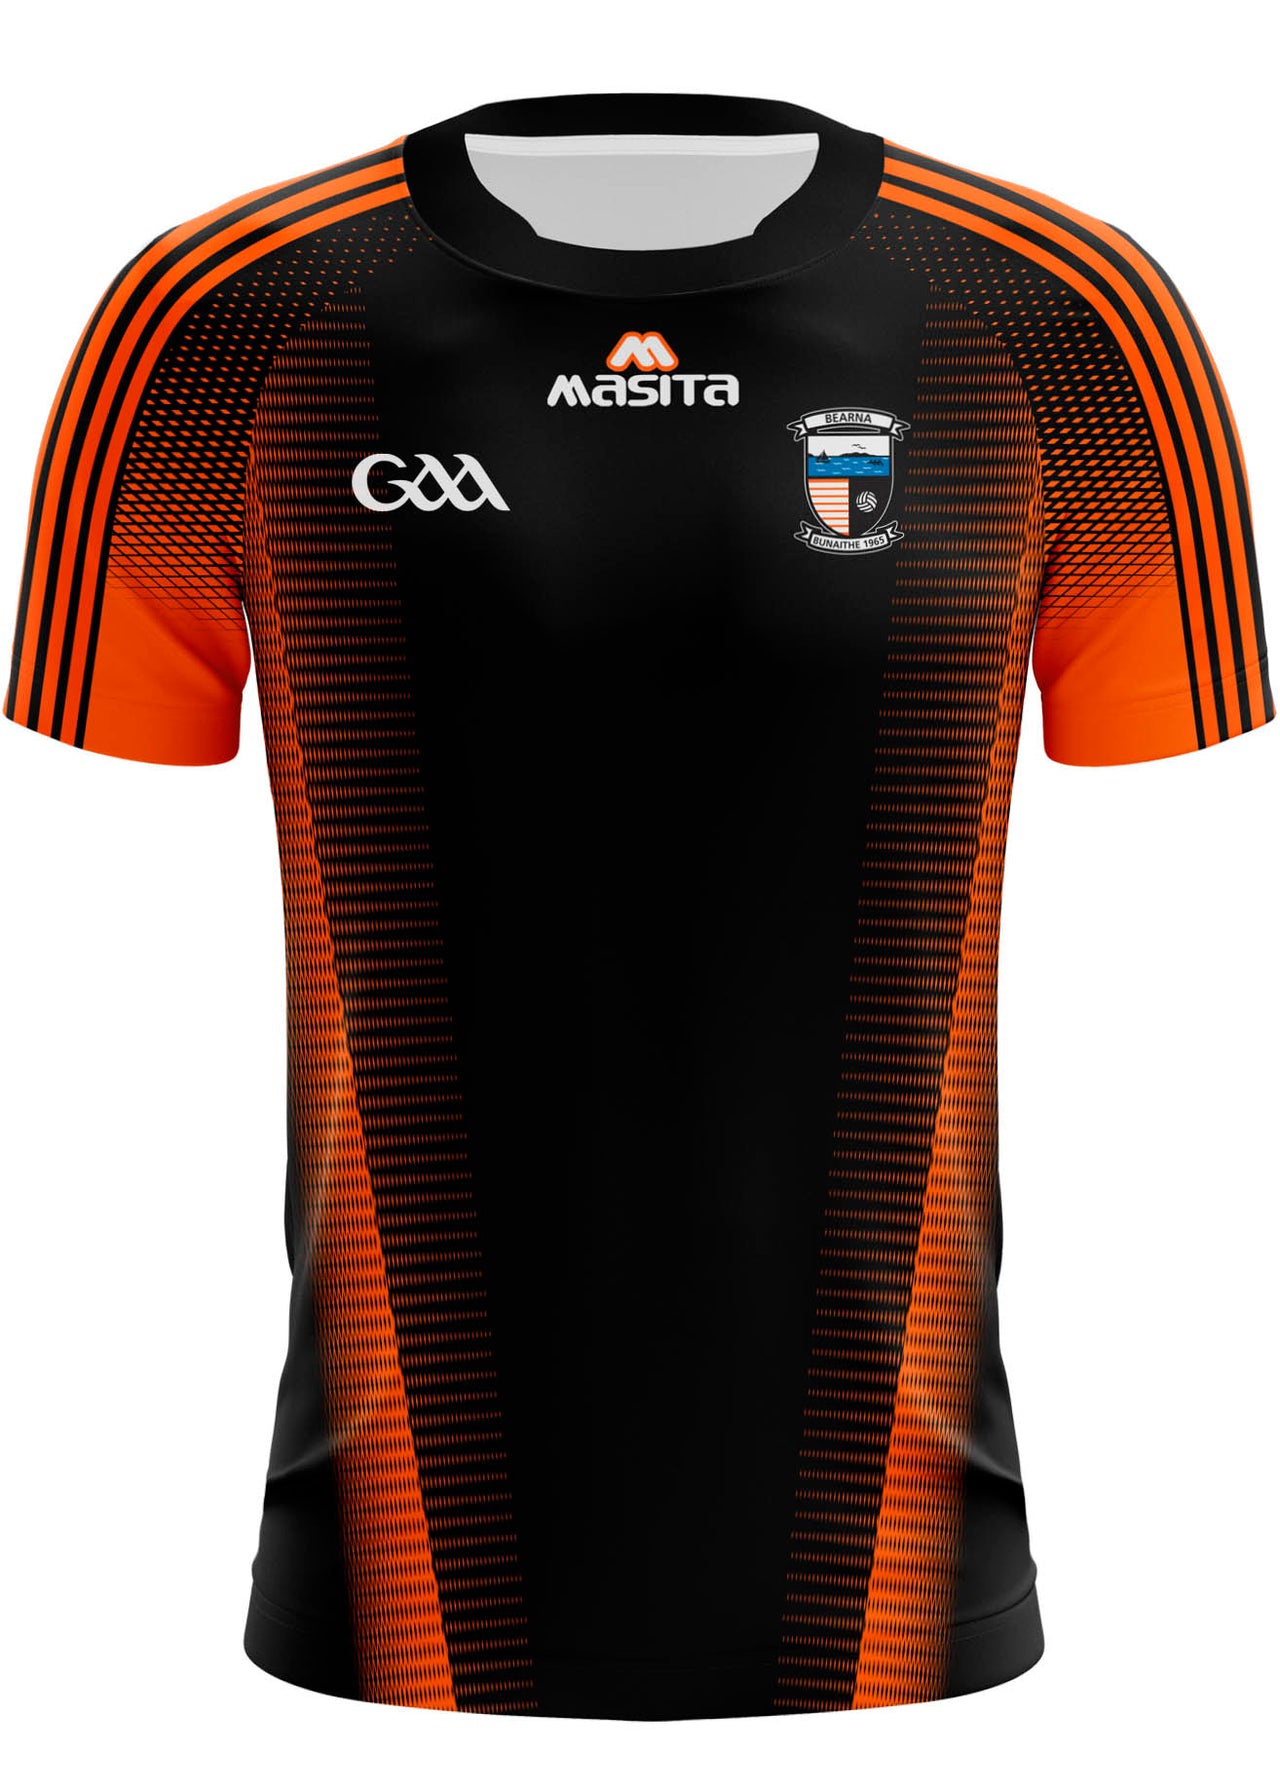 Bearna GAA Home Jersey Player Fit Adult